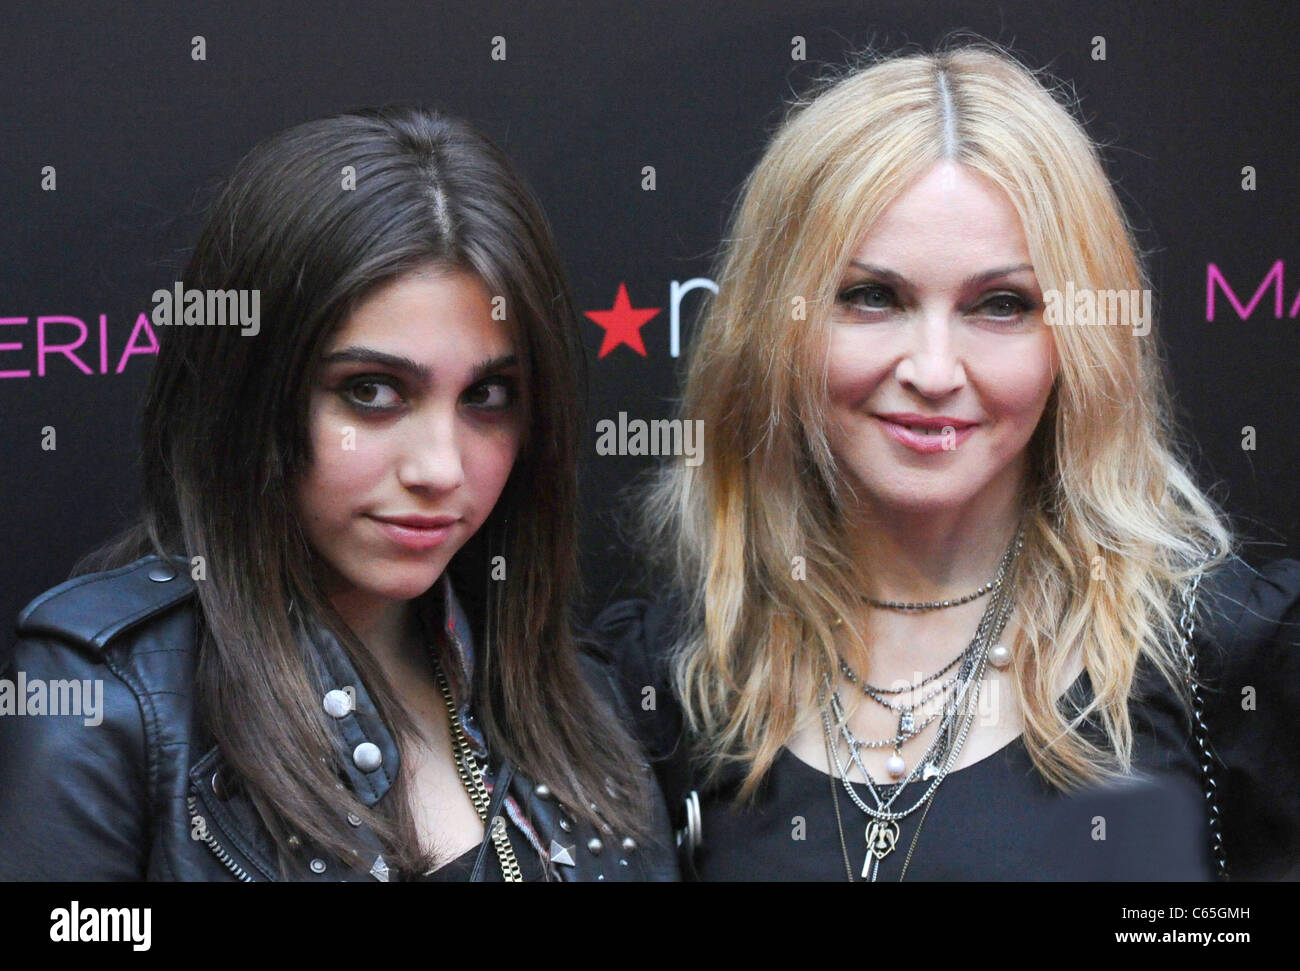 Lourdes Leon, Madonna at in-store appearance for The Material Girl Collection Launch, Macy's Herald Square Department Store, New York, NY September 22, 2010. Photo By: Rob Rich/Everett Collection Stock Photo